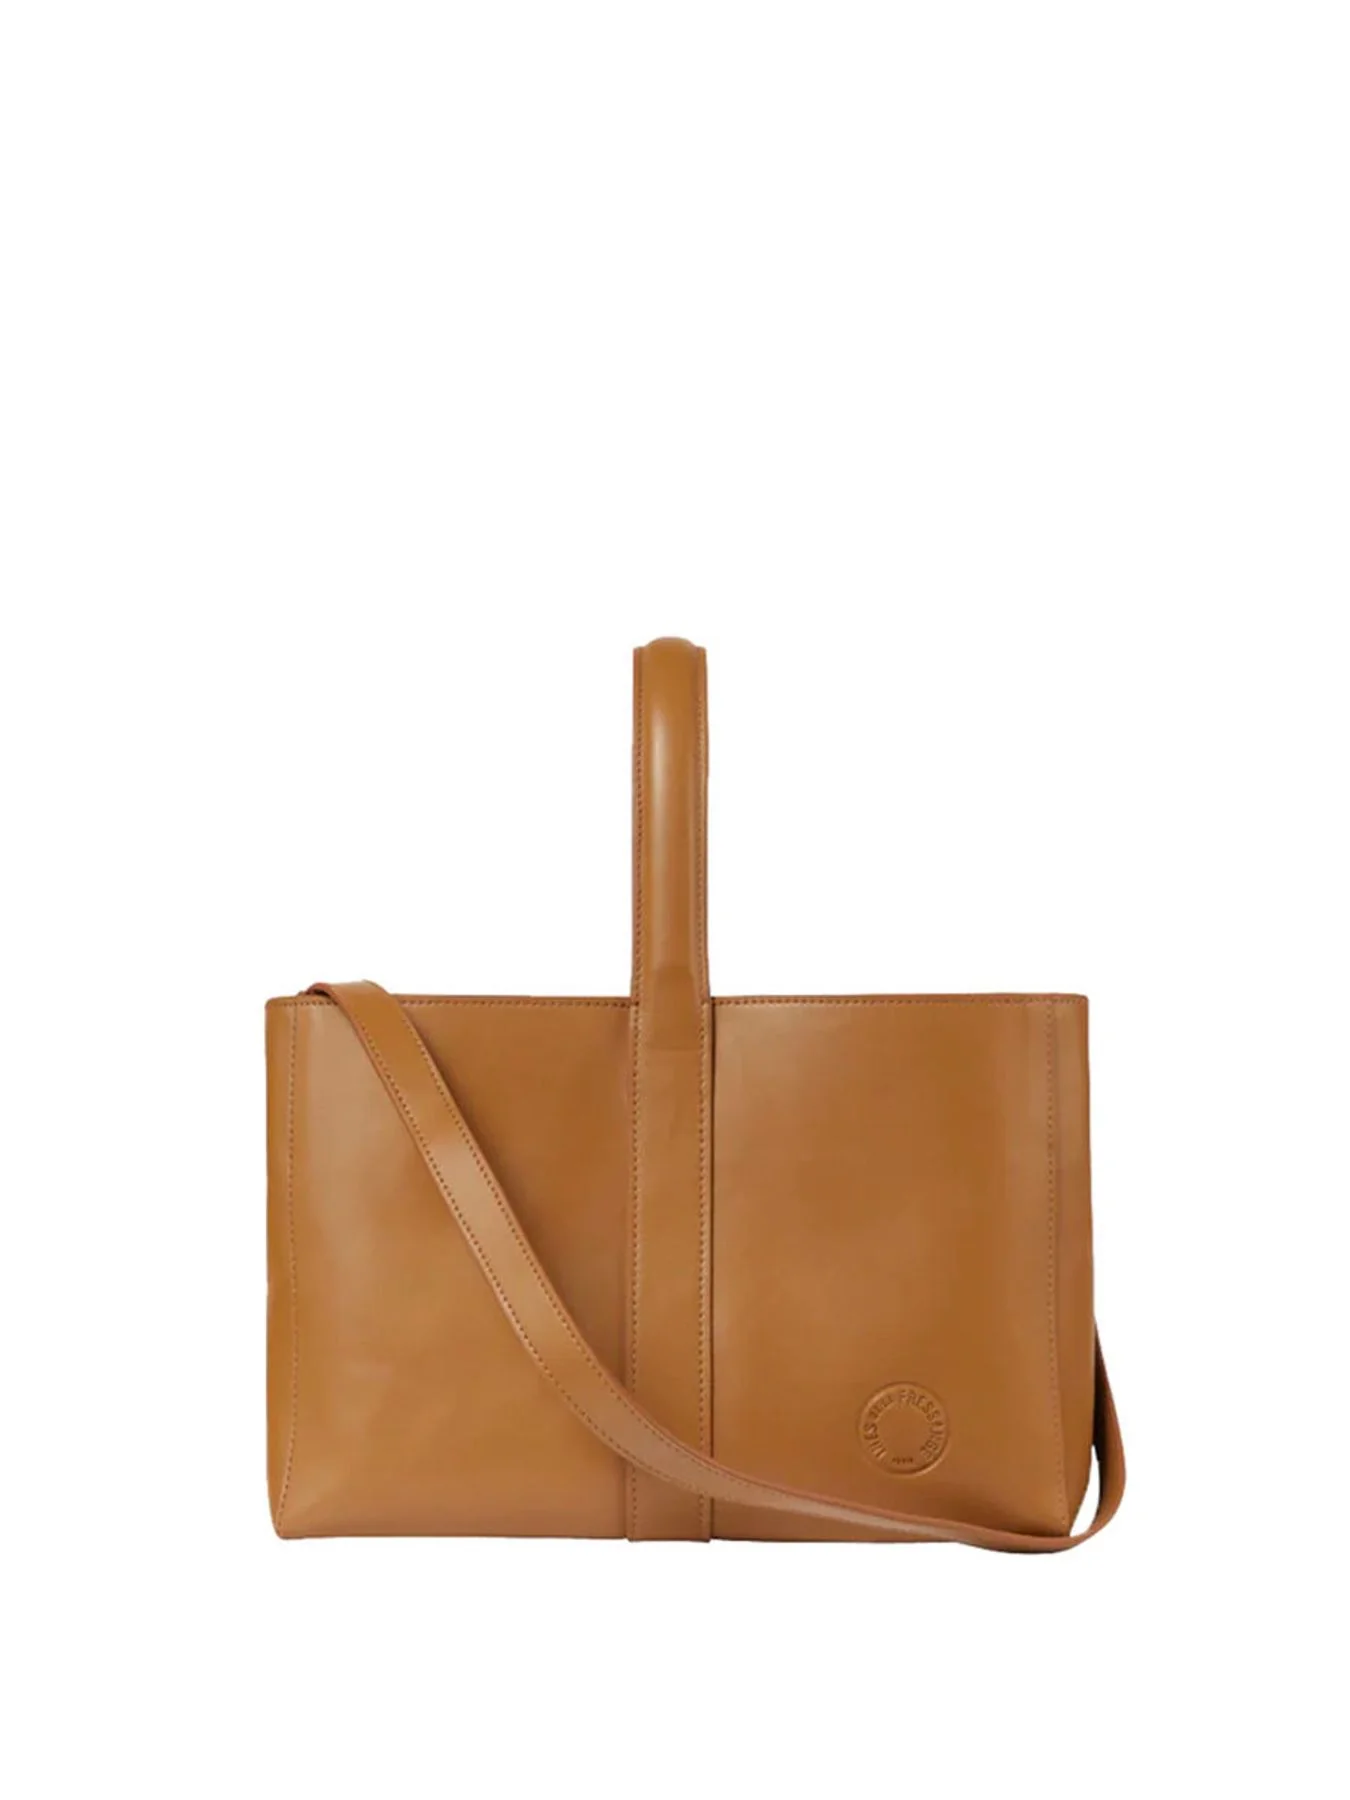 bag-cabas-leather-leonore-small-format-camel